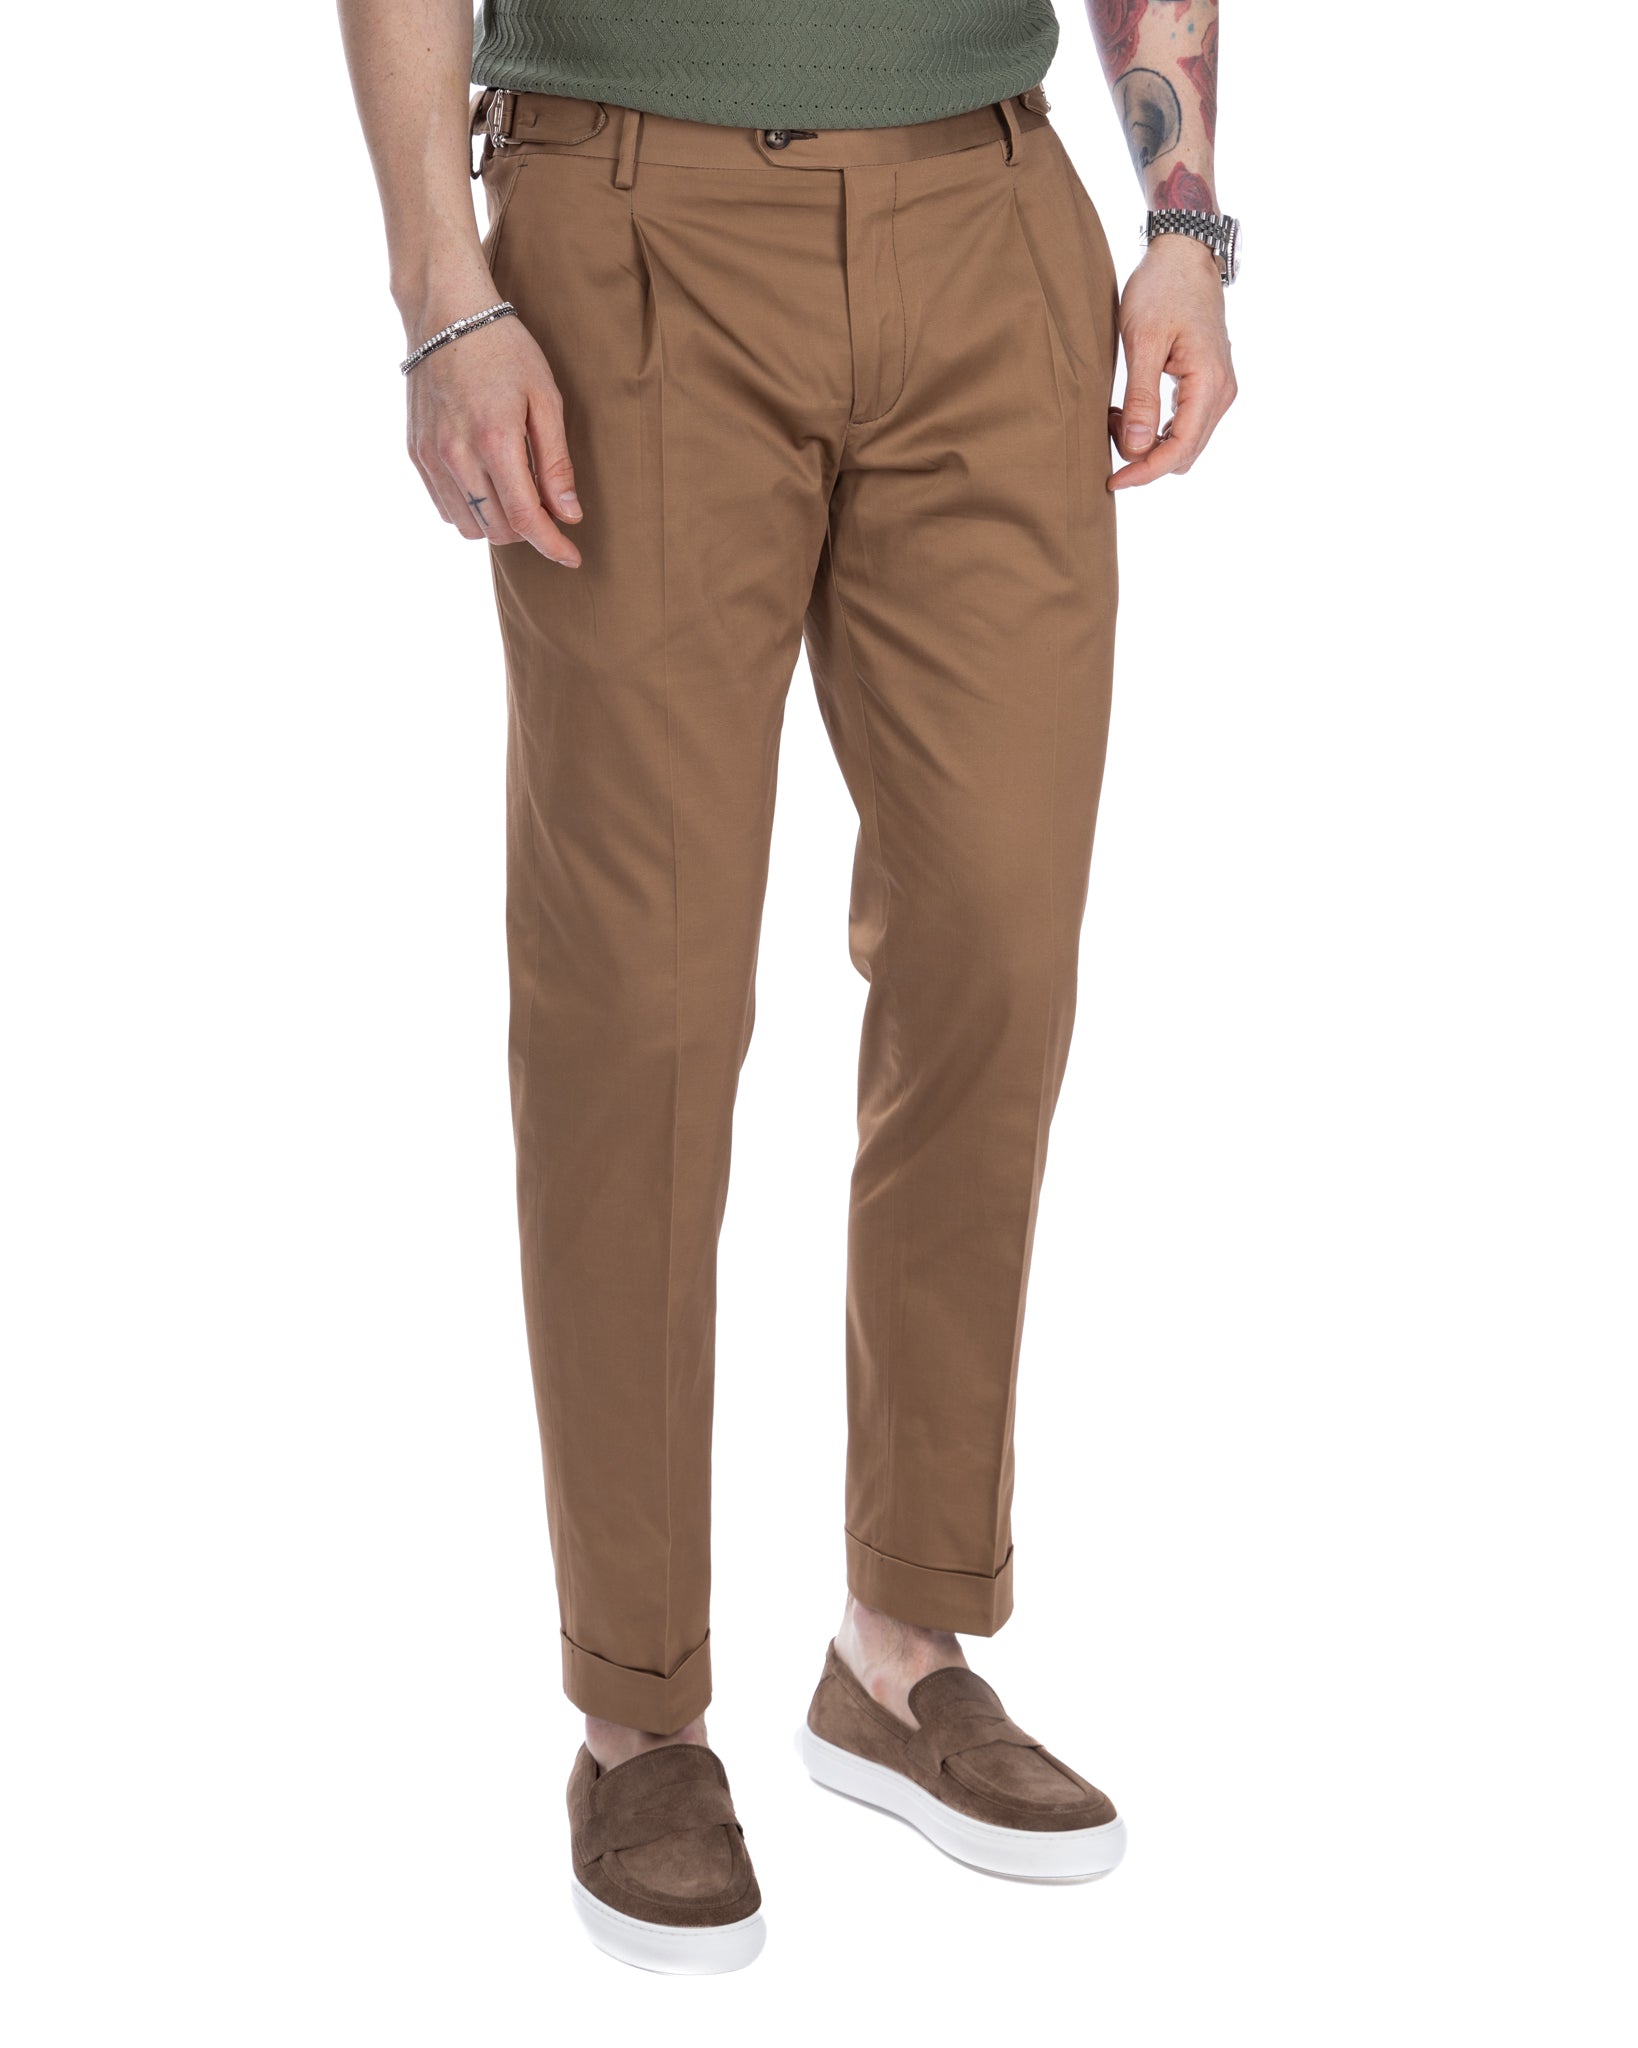 James - high waisted camel trousers with buckles